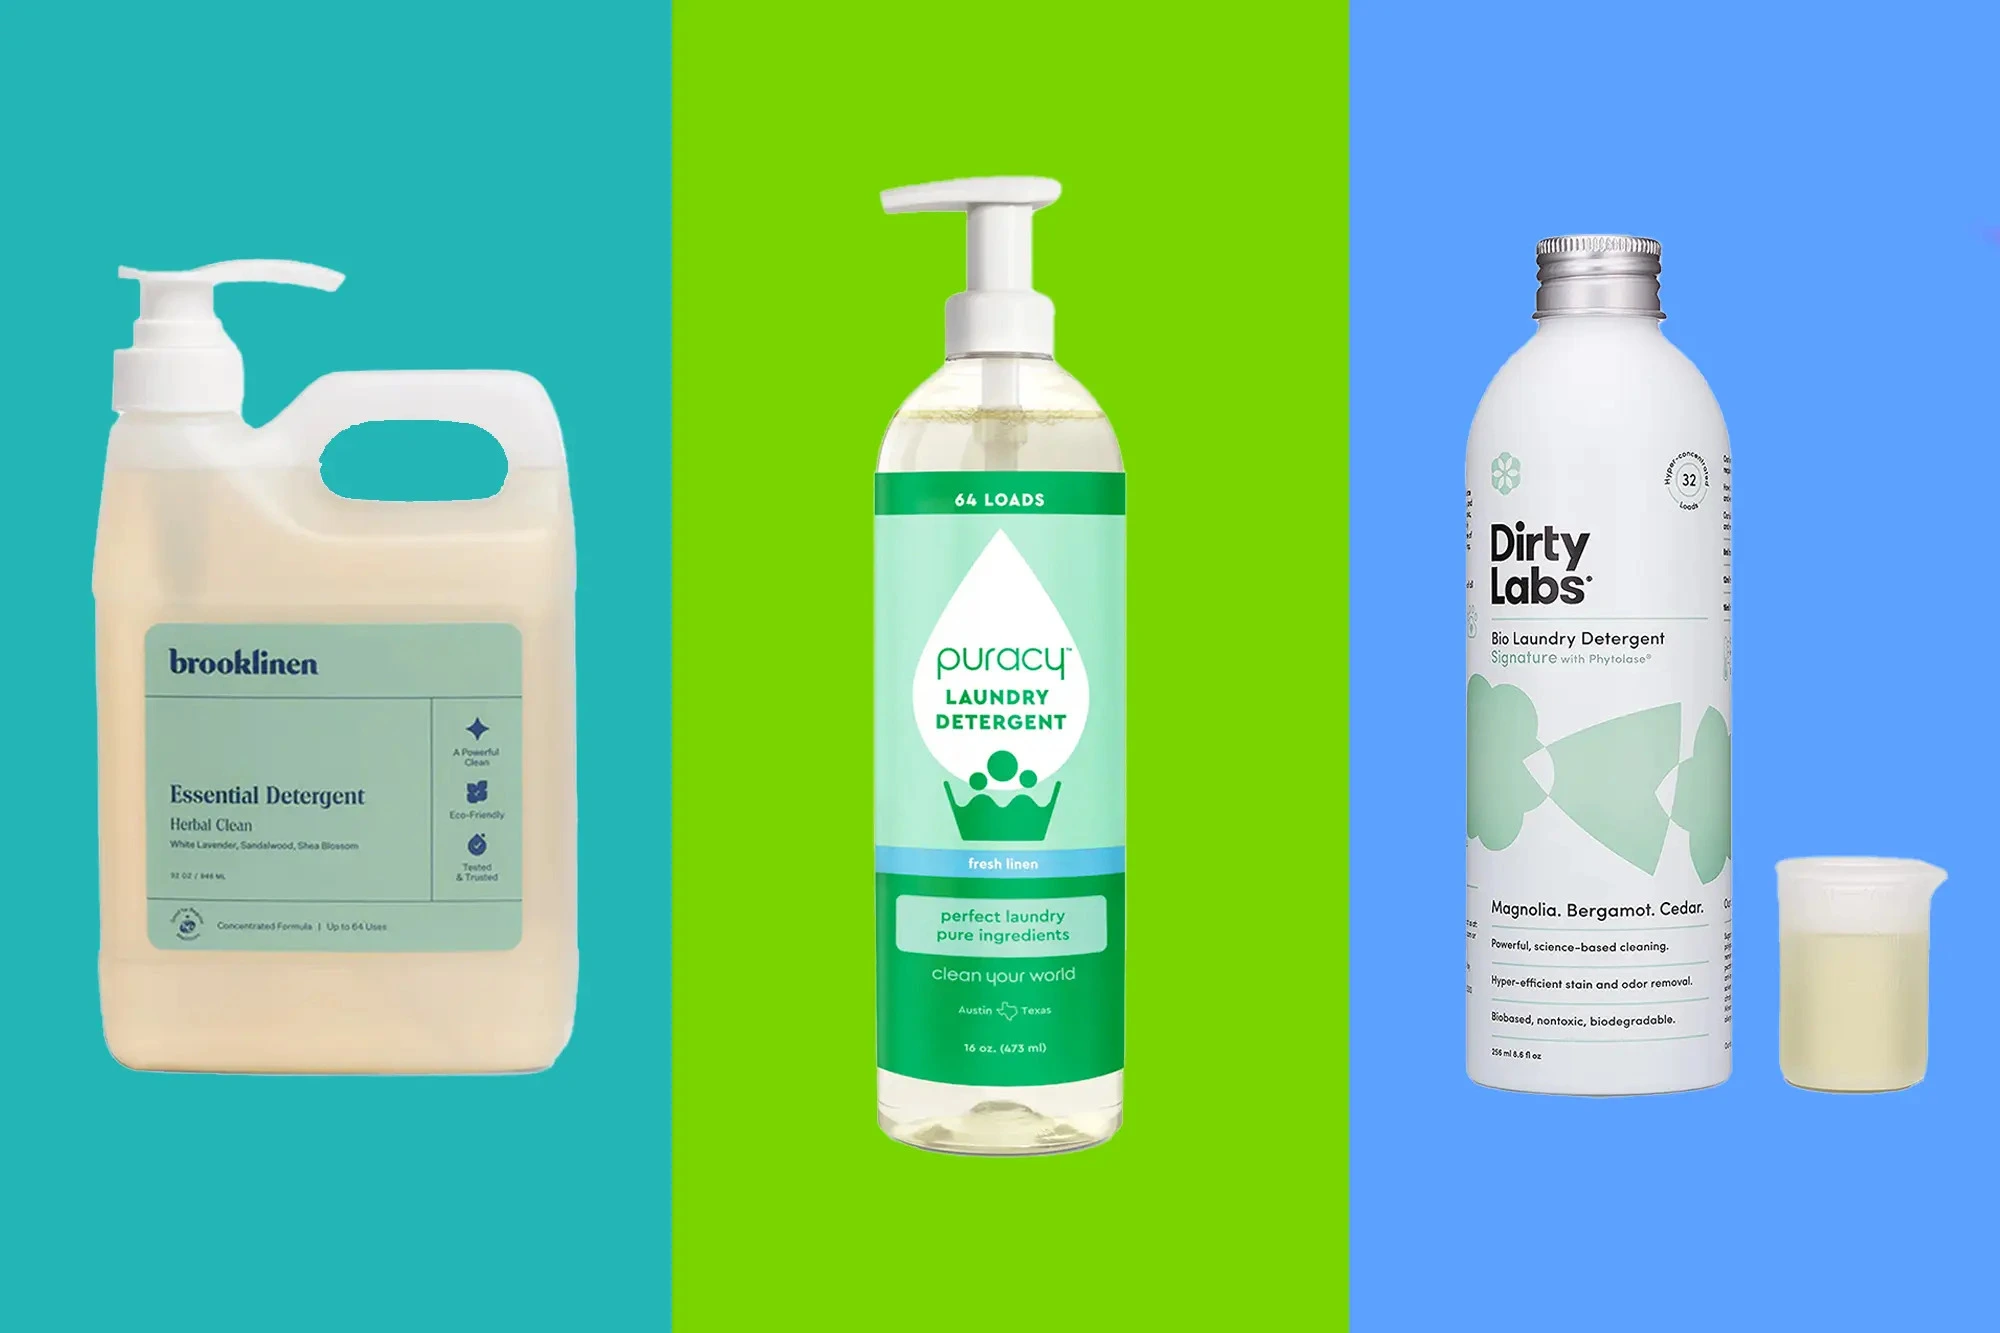 Organic laundry detergents are plant-based